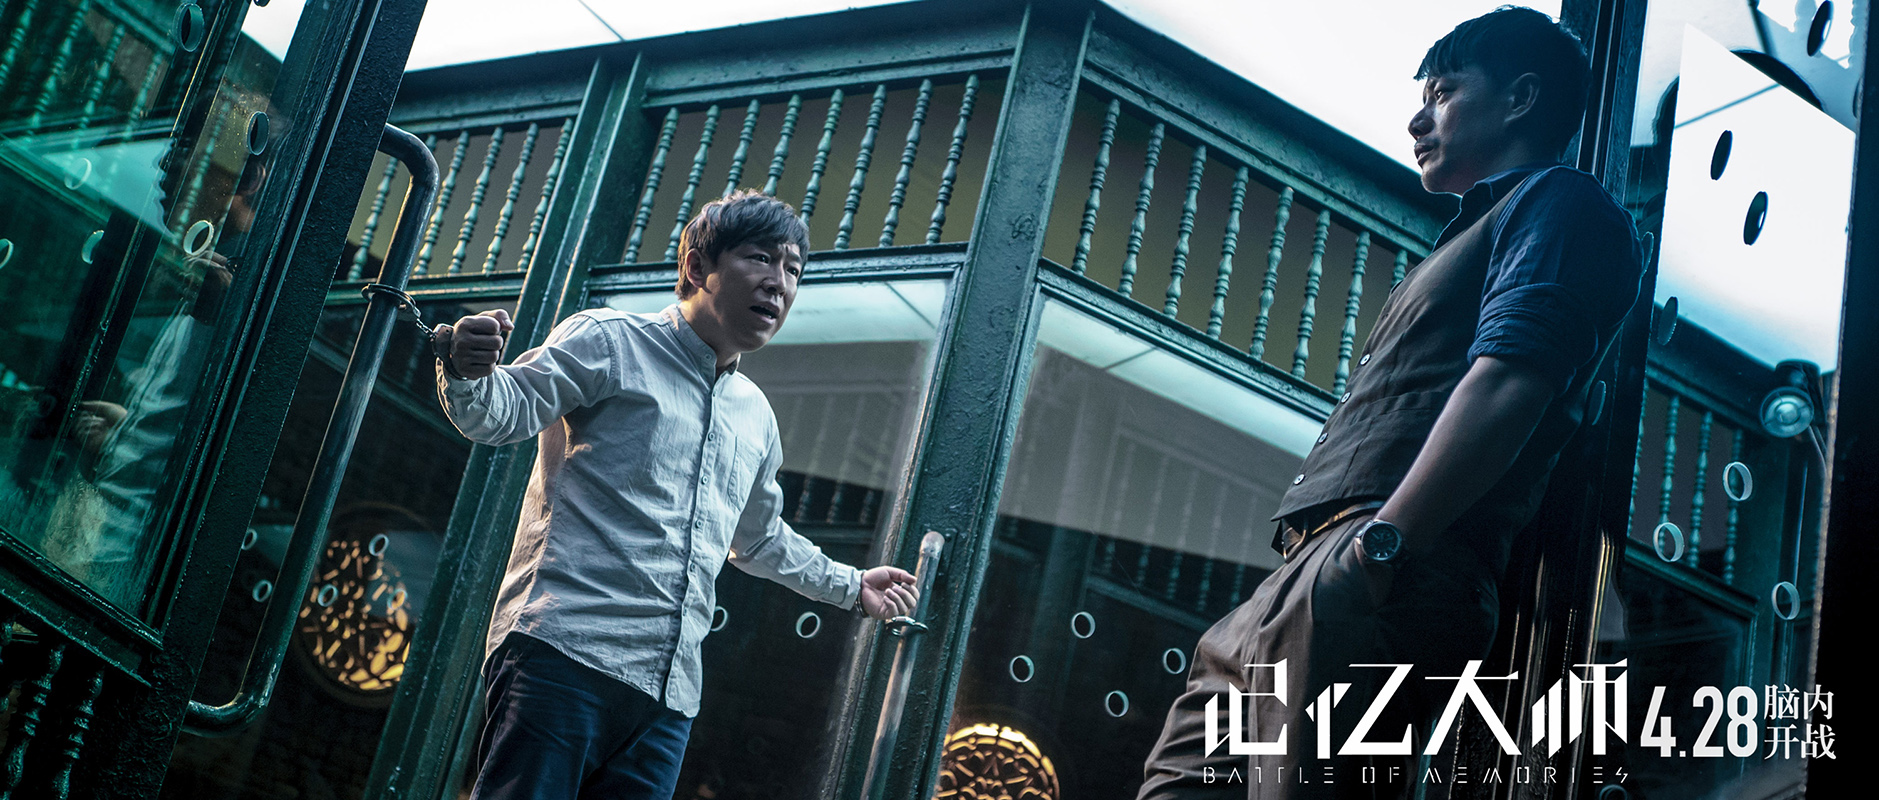 A still from Battle of Memories shows a confrontation between veteran actors Huang Bo and Duan Yihong. The sci-fi crime thriller is hitting theatres Friday, April 28, 2017.[Photo: China Plus]